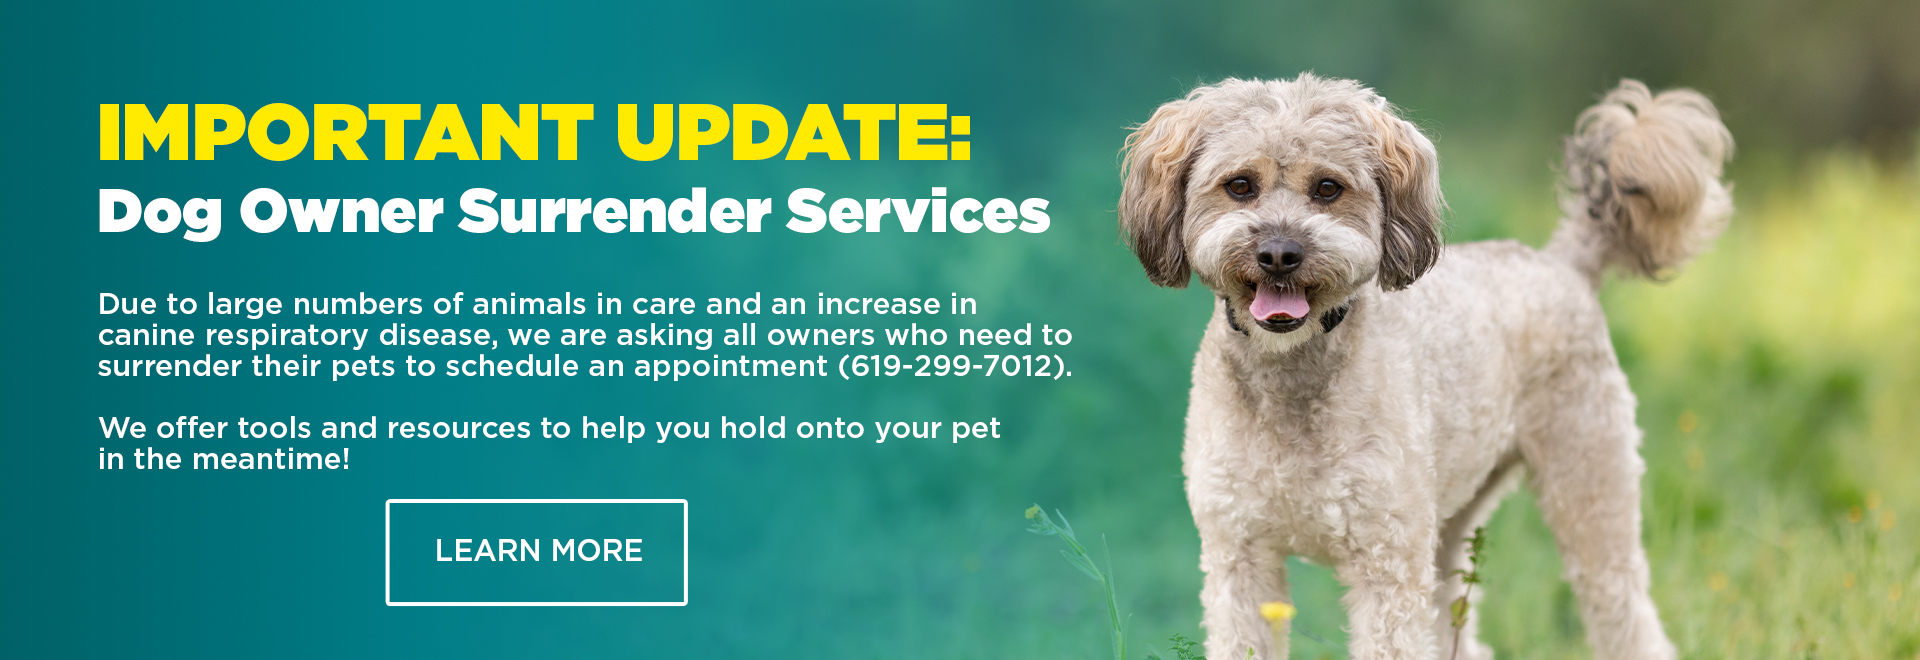 Important Update: Dog Owner Surrender Services | Due to large numbers of animals in care and an increase to canine respiratory disease, we are asking all owners who need to surrender their pets to schedule and appointment (619-299-7012) | We offer tools and resources to help you hold onto your pet in the meantime! | Learn More